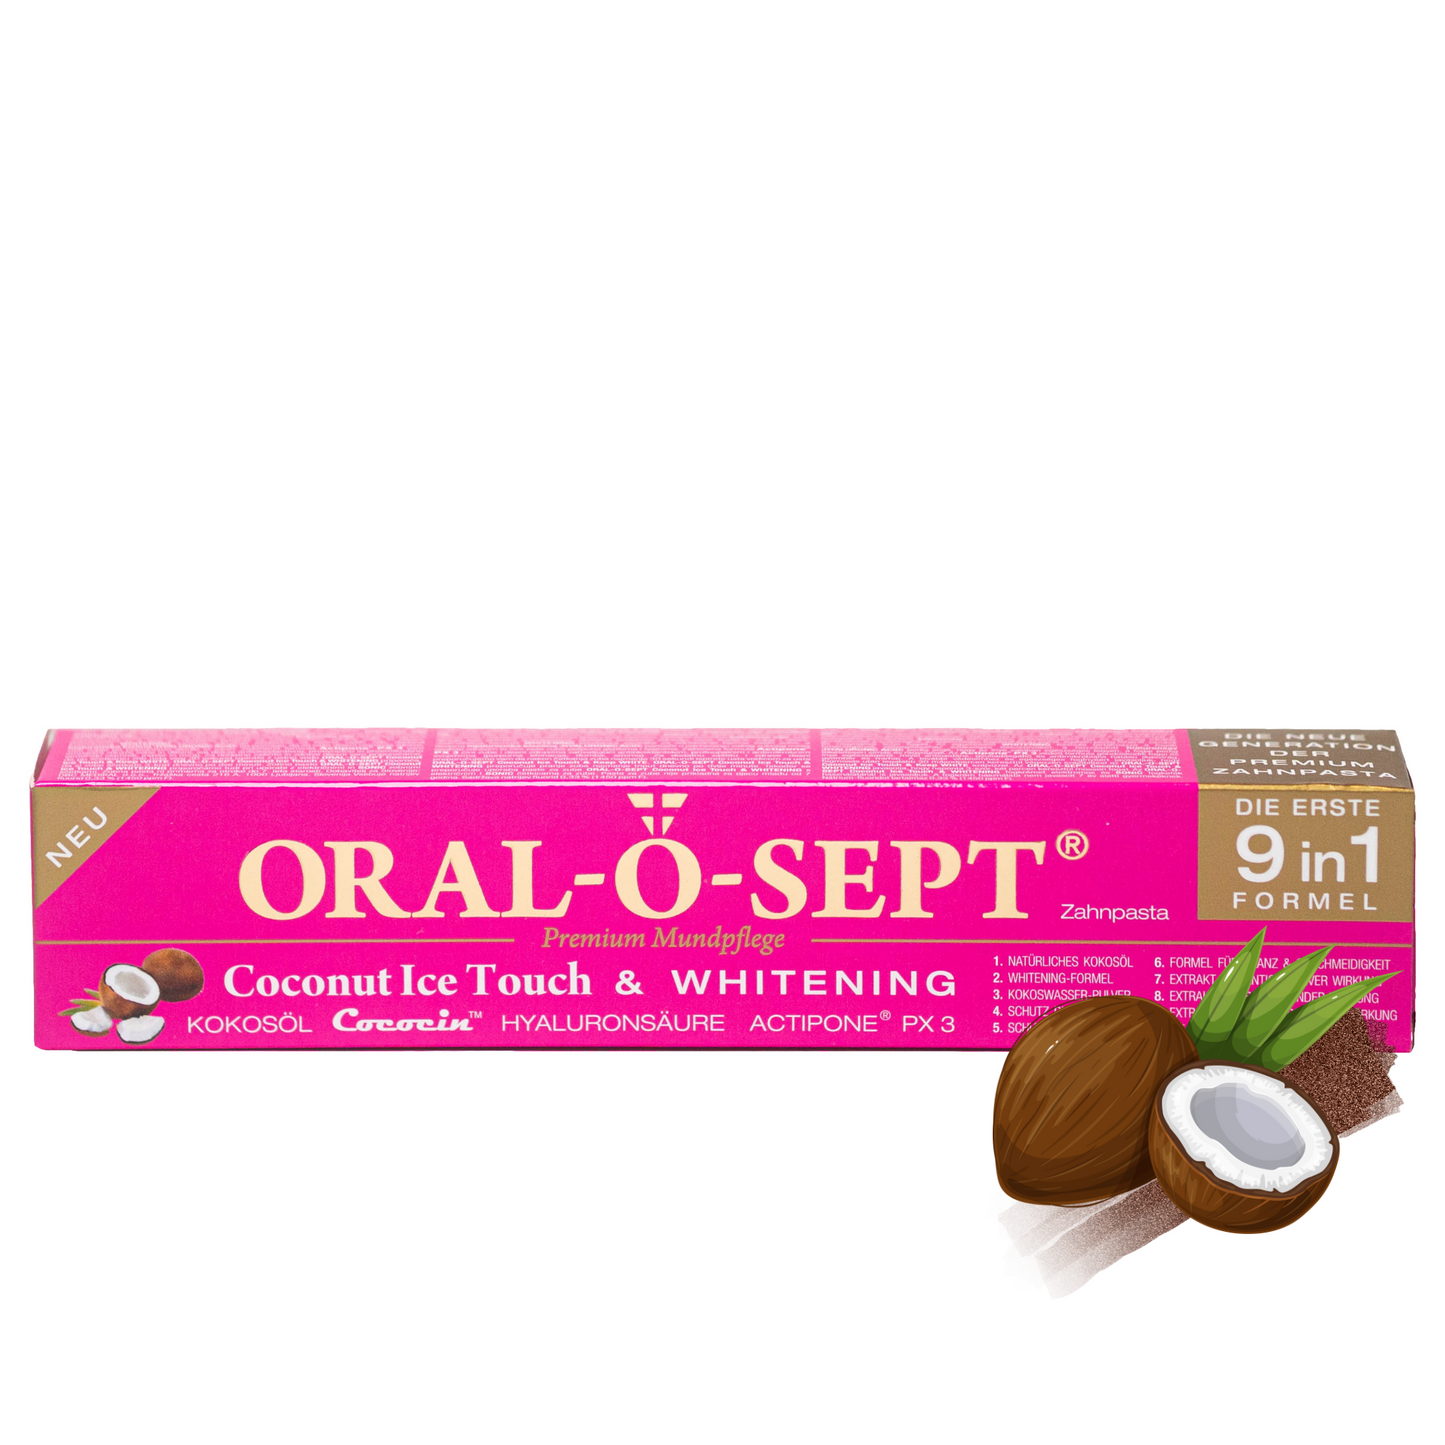 ORAL-O-SEPT Premium Toothpaste Coconut Ice Touch & WHITENING